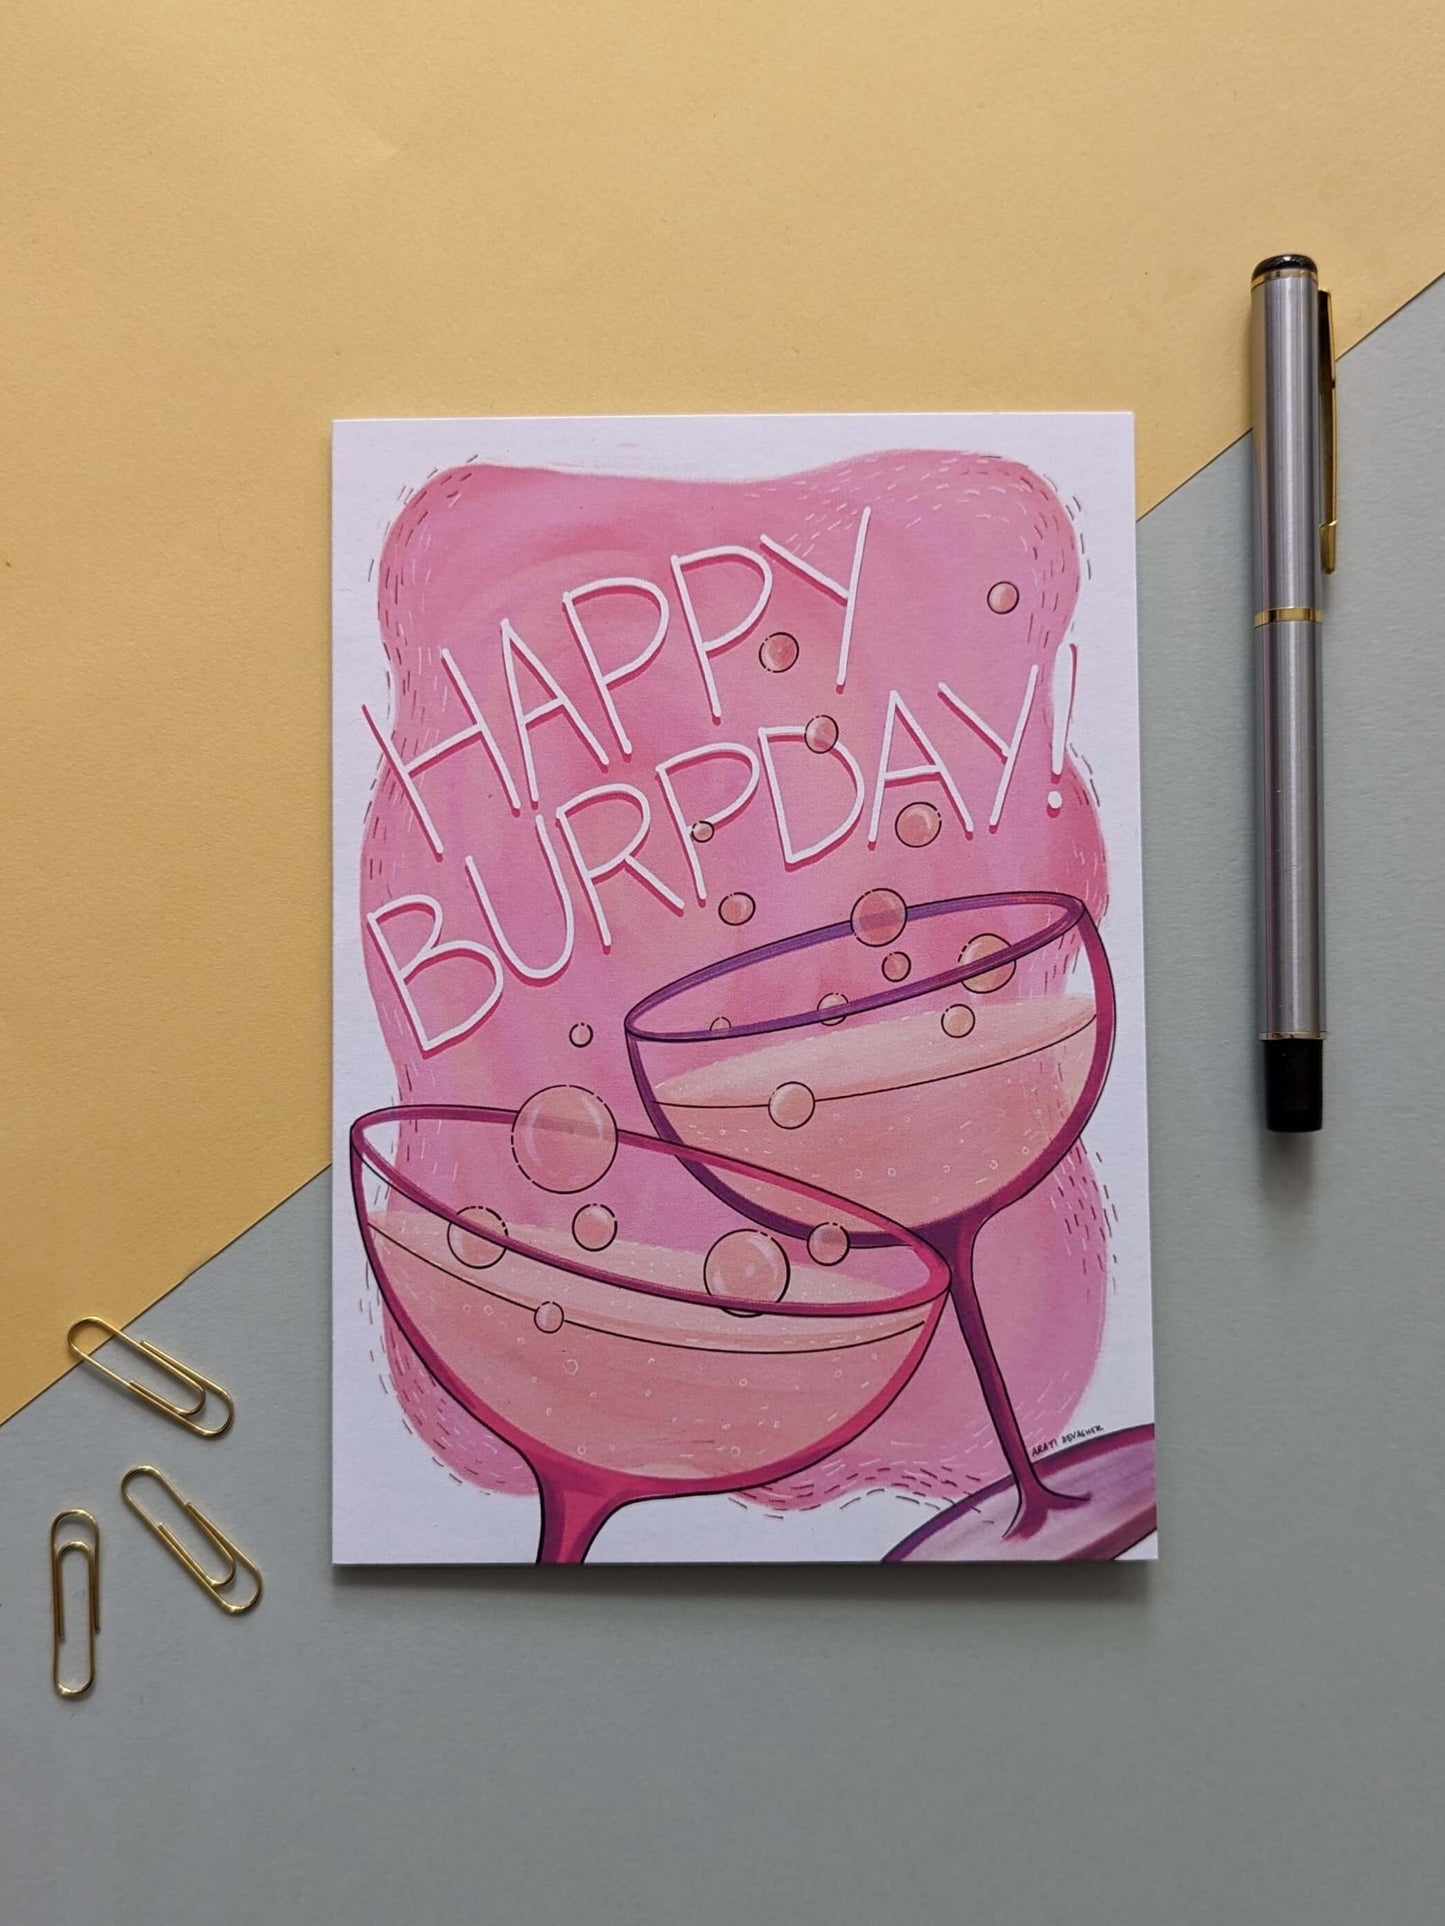 Happy Burpday Bubbly – (end of line) birthday greeting card